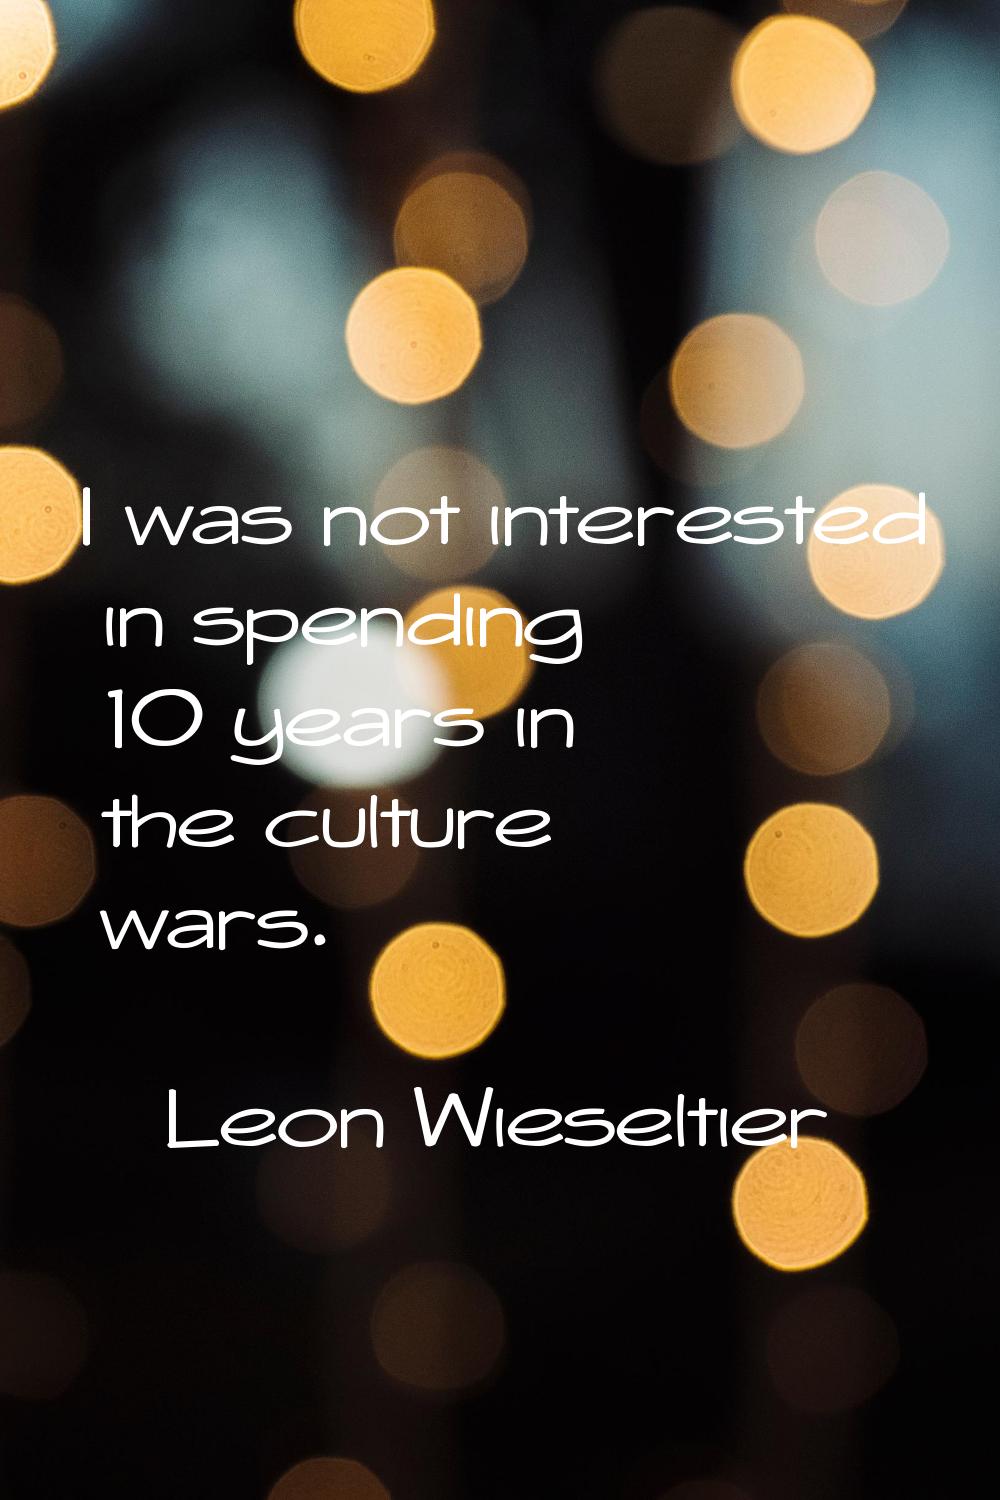 I was not interested in spending 10 years in the culture wars.